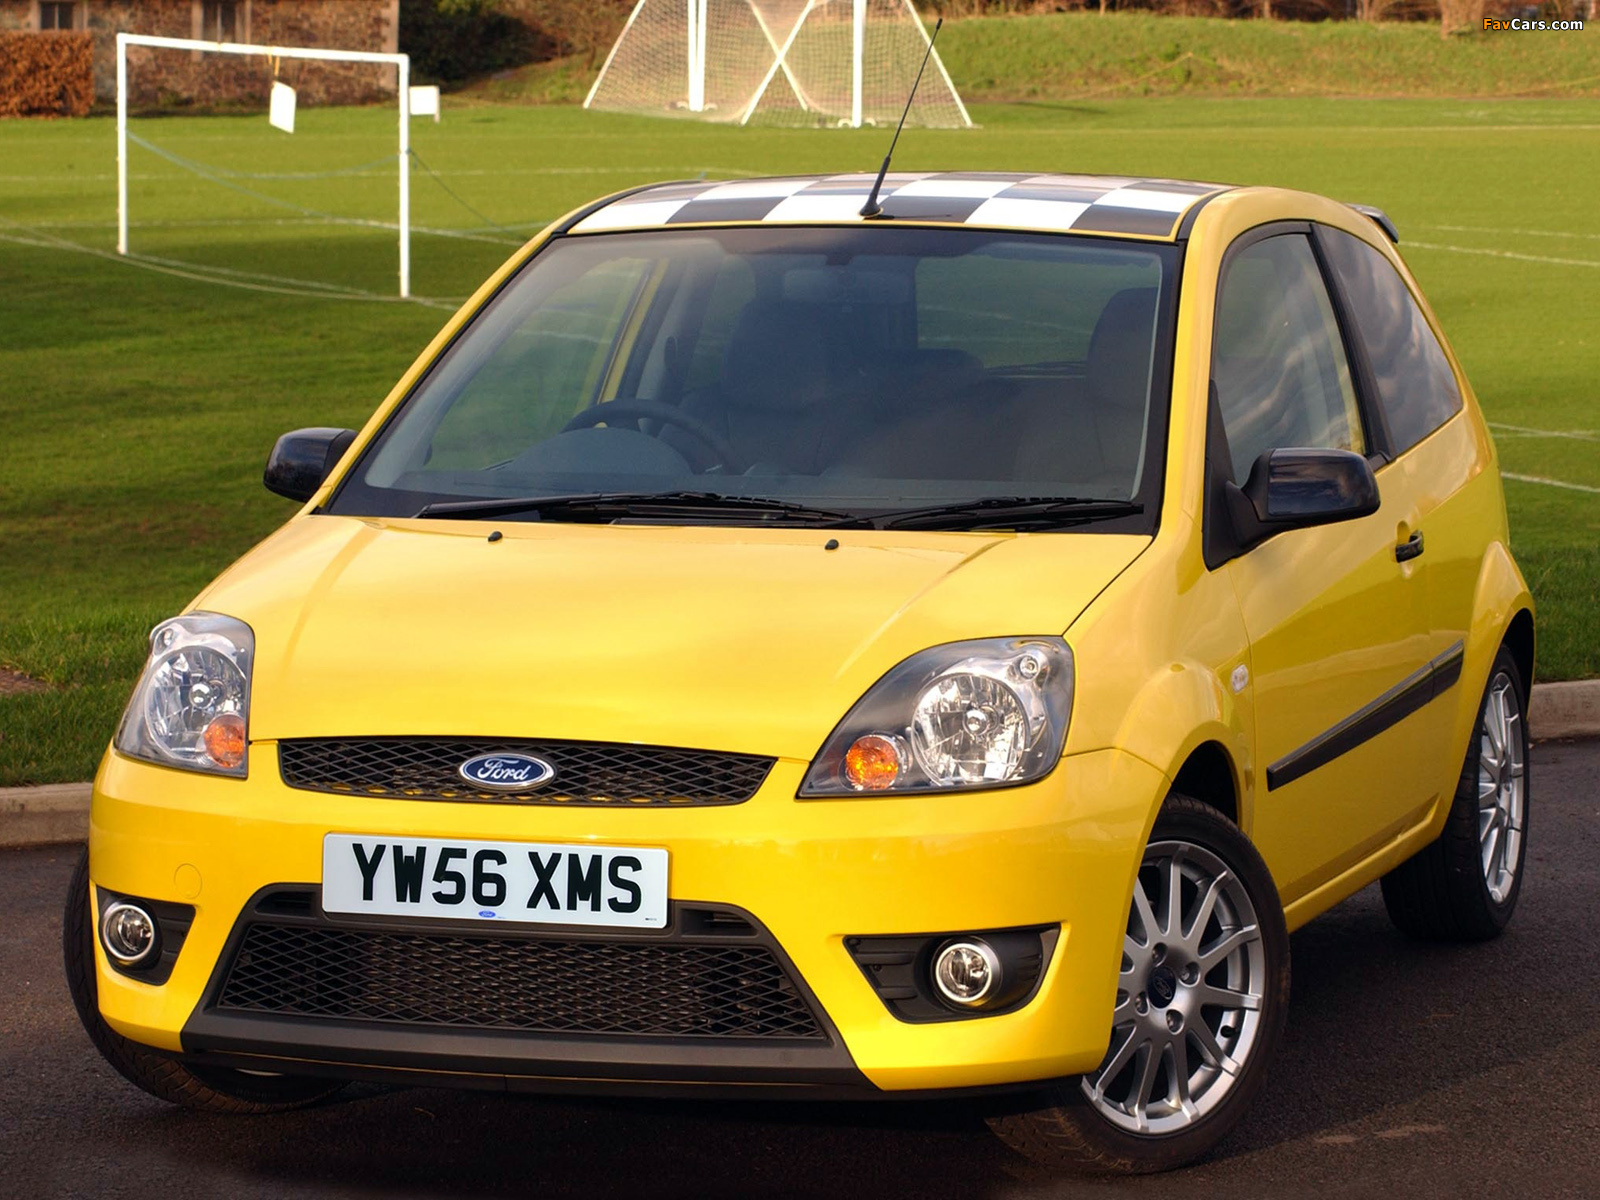 Ford Fiesta Zetec S 30th Anniversary 2007 images (1600 x 1200)